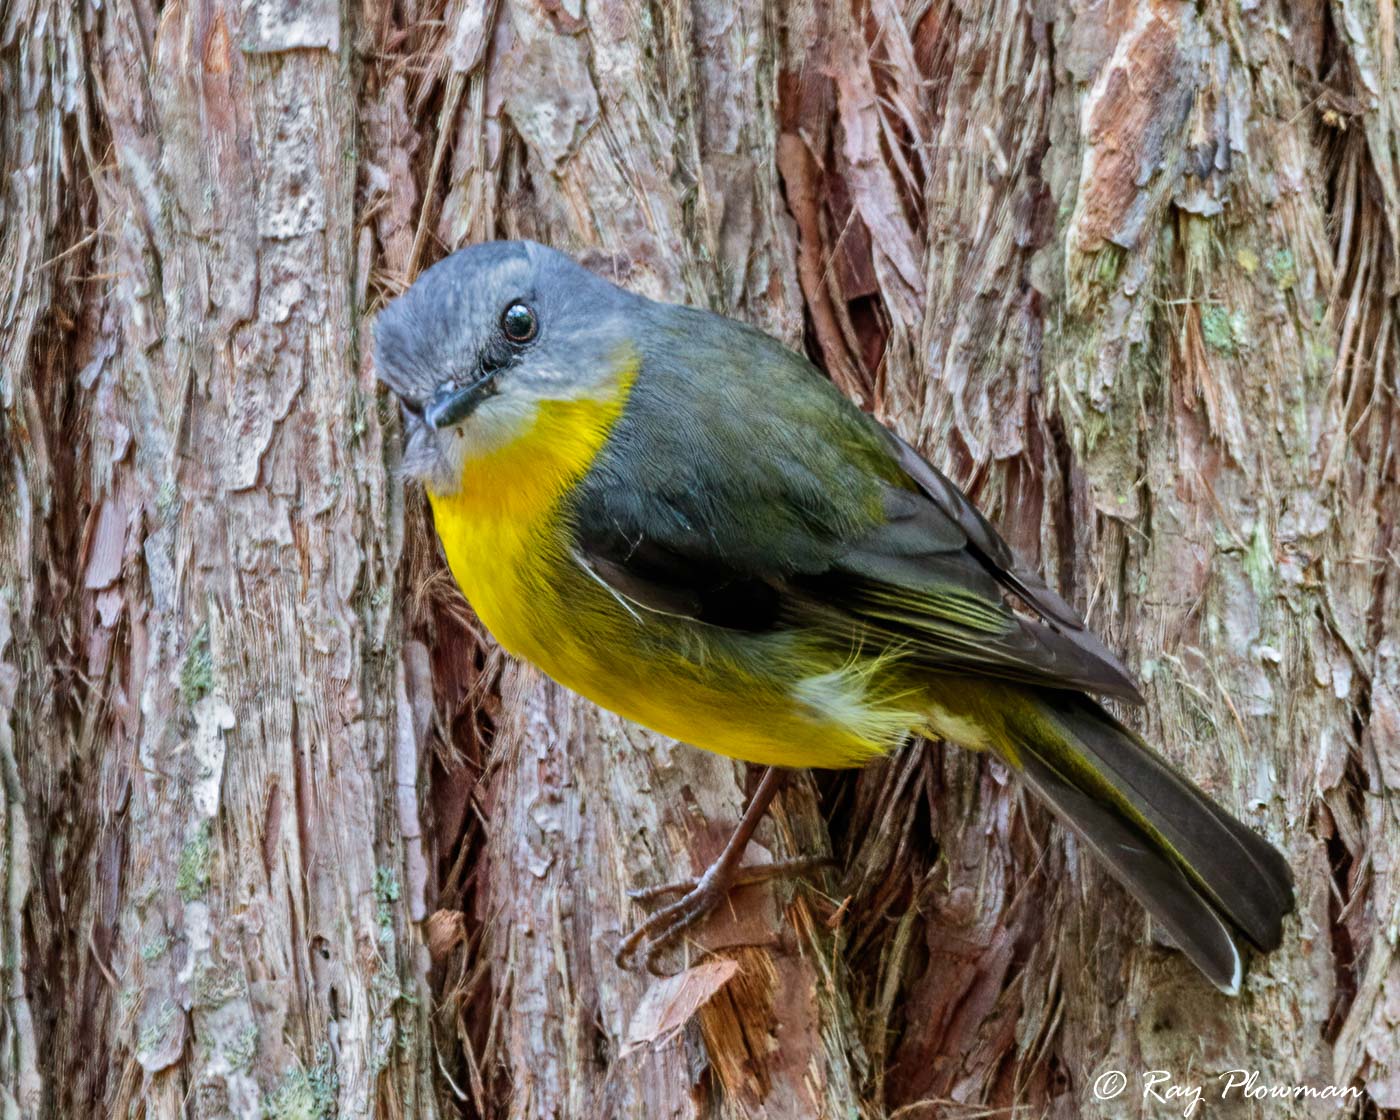 Eastern Yellow Robin (Eopsaltria australis) perched at Booderee National Park in Jervis Bay Territory